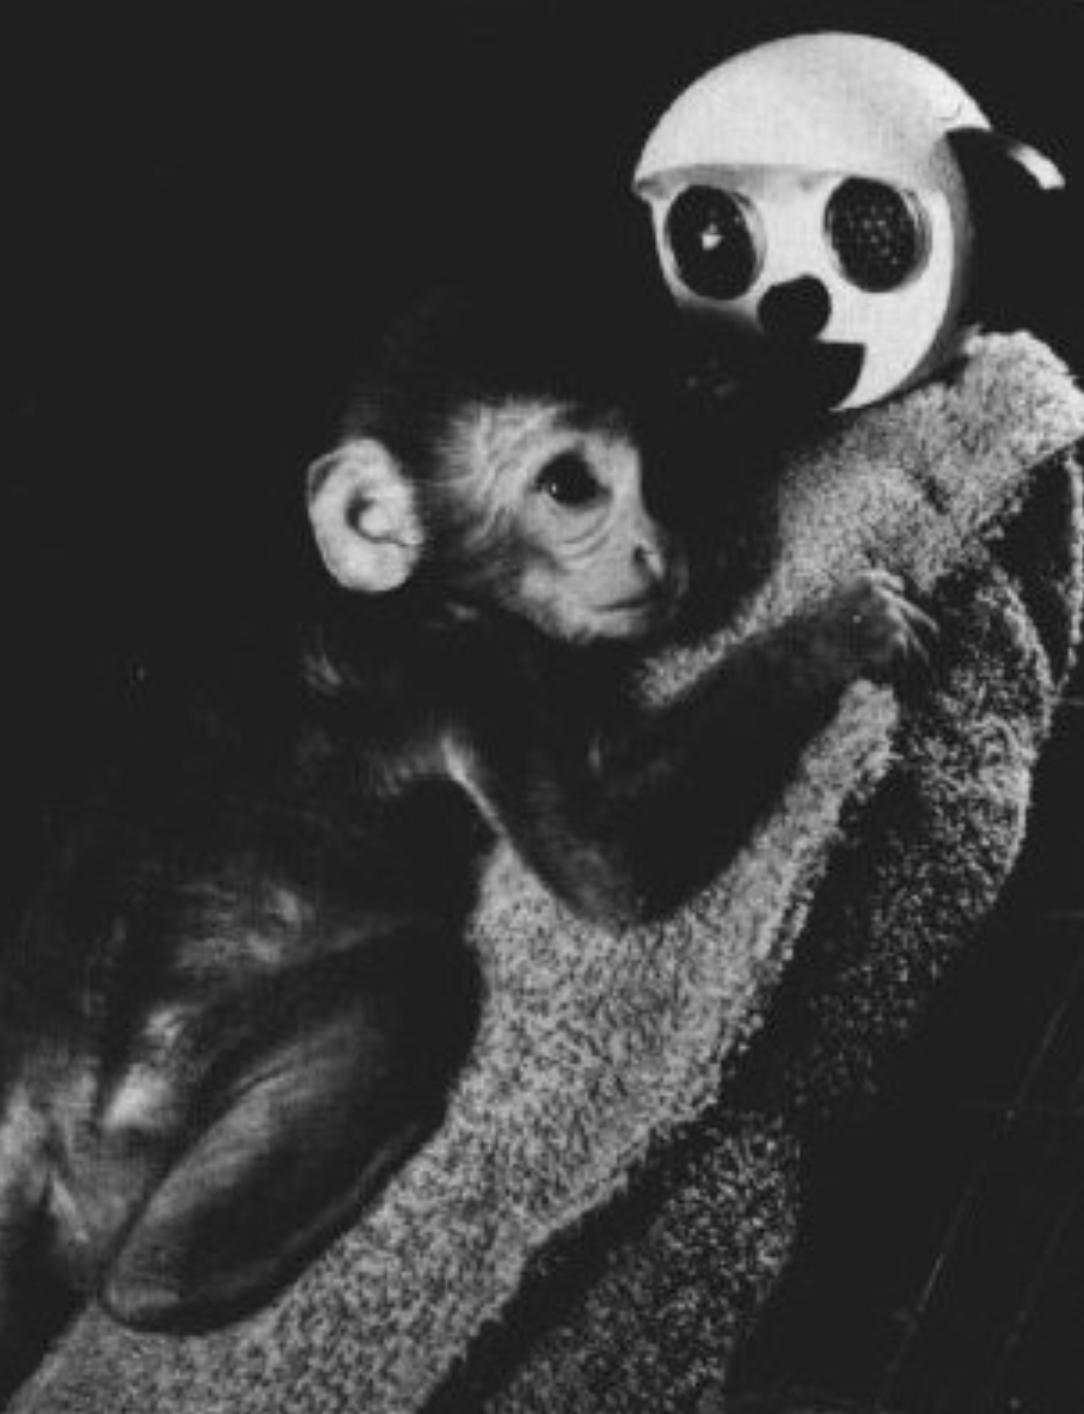 Harlow's monkey spending time with the warm mother which showed the power of the mother-child attachment theory, an interesting research topic in developmental psychology which has also influenced caregivers in the education field.